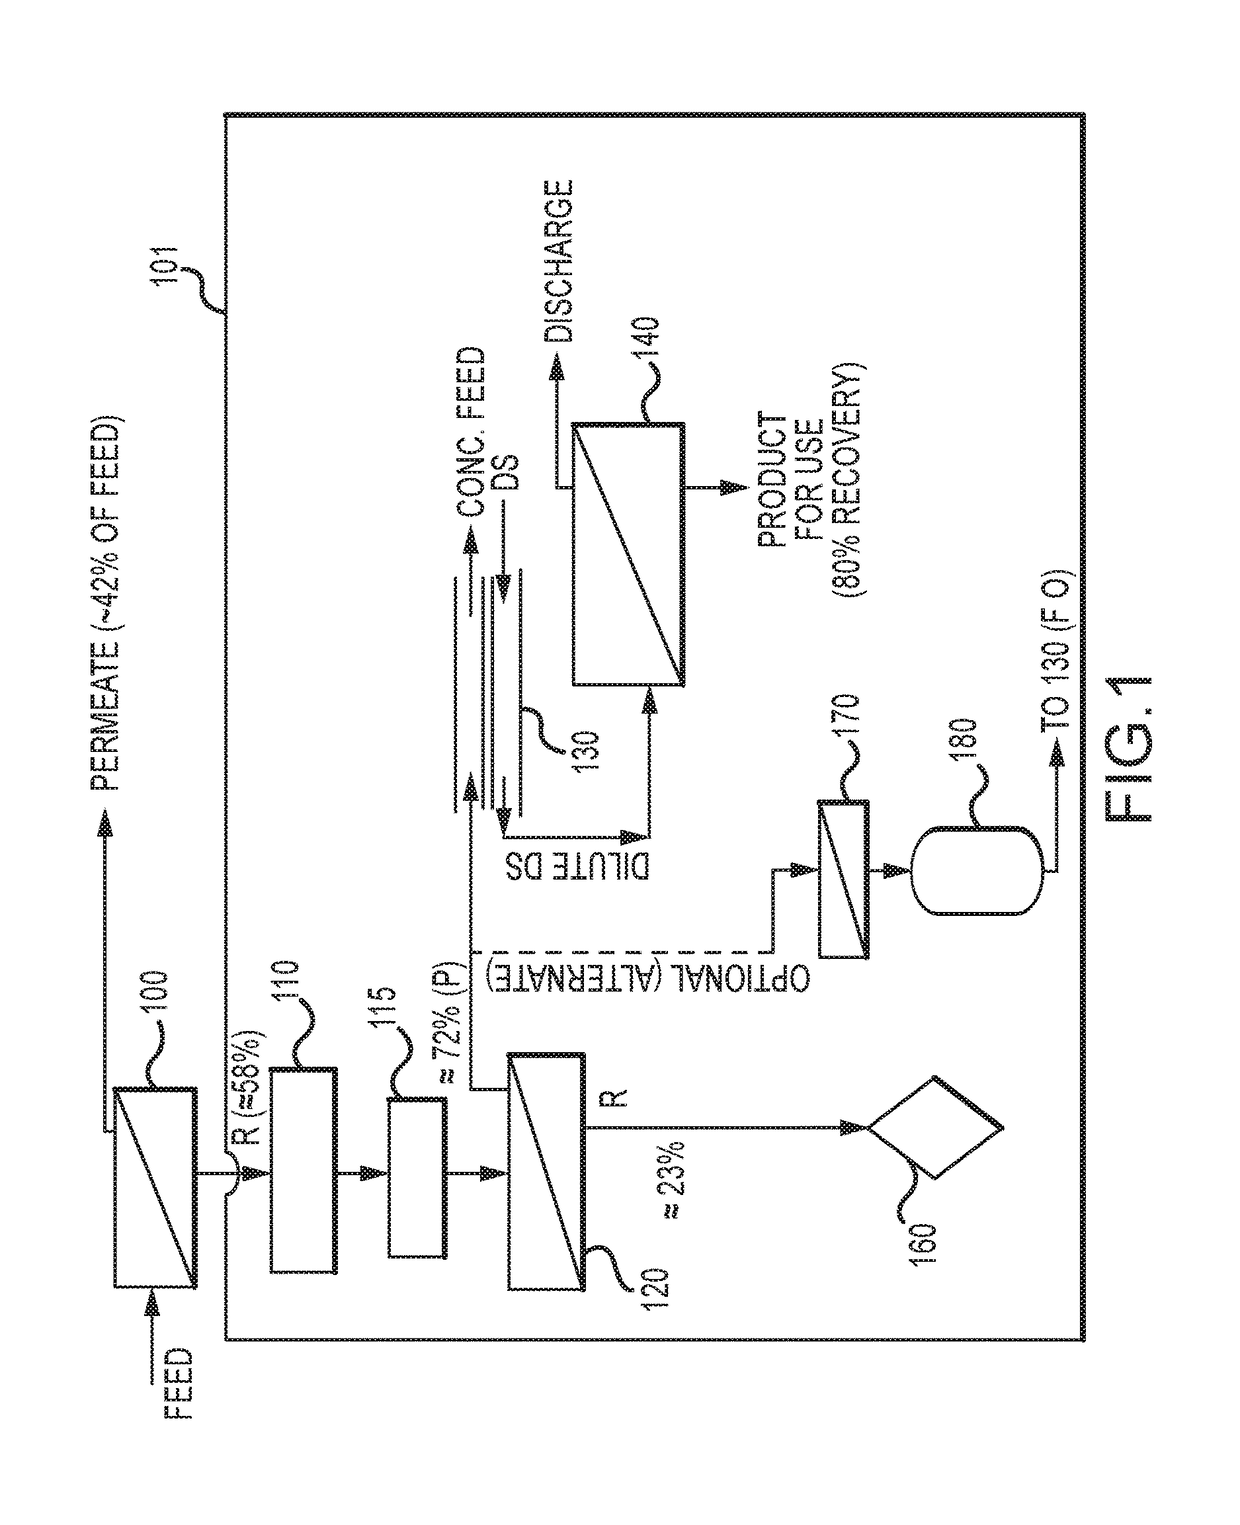 Integrated osmosis systems and methods